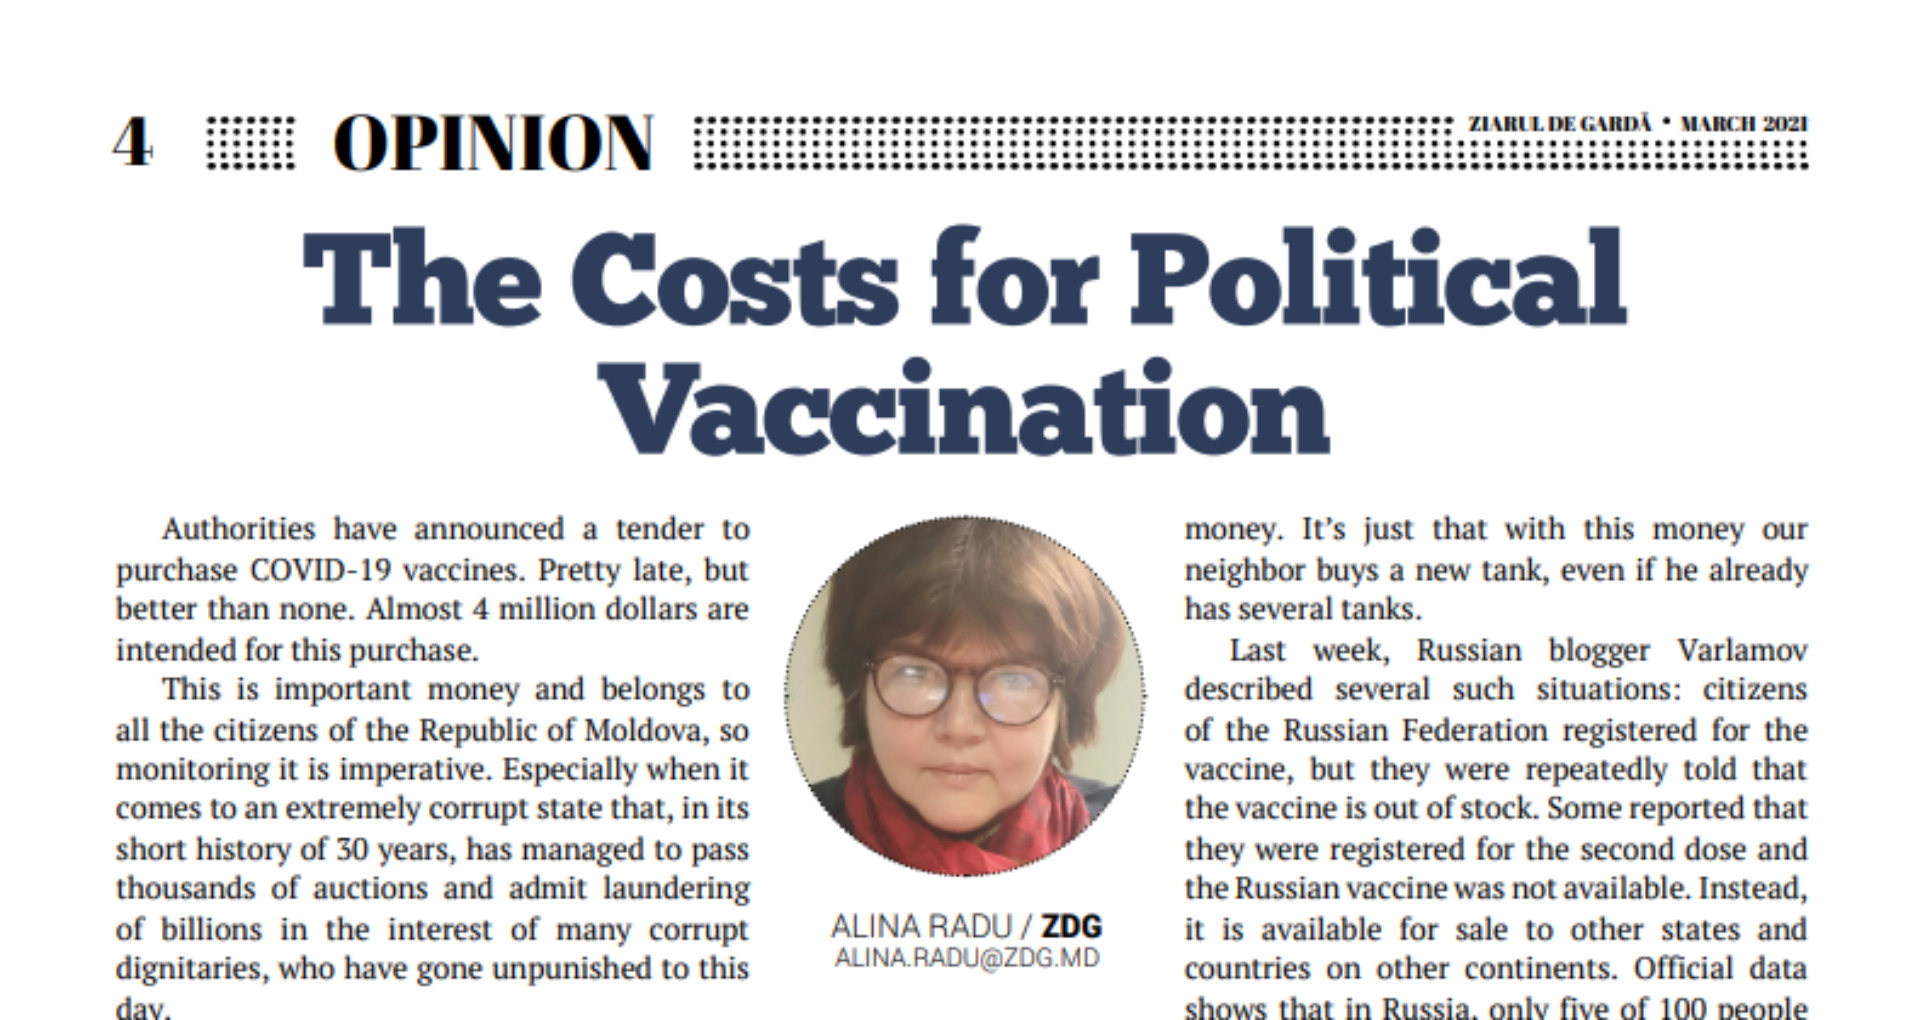 The Costs for Political Vaccination